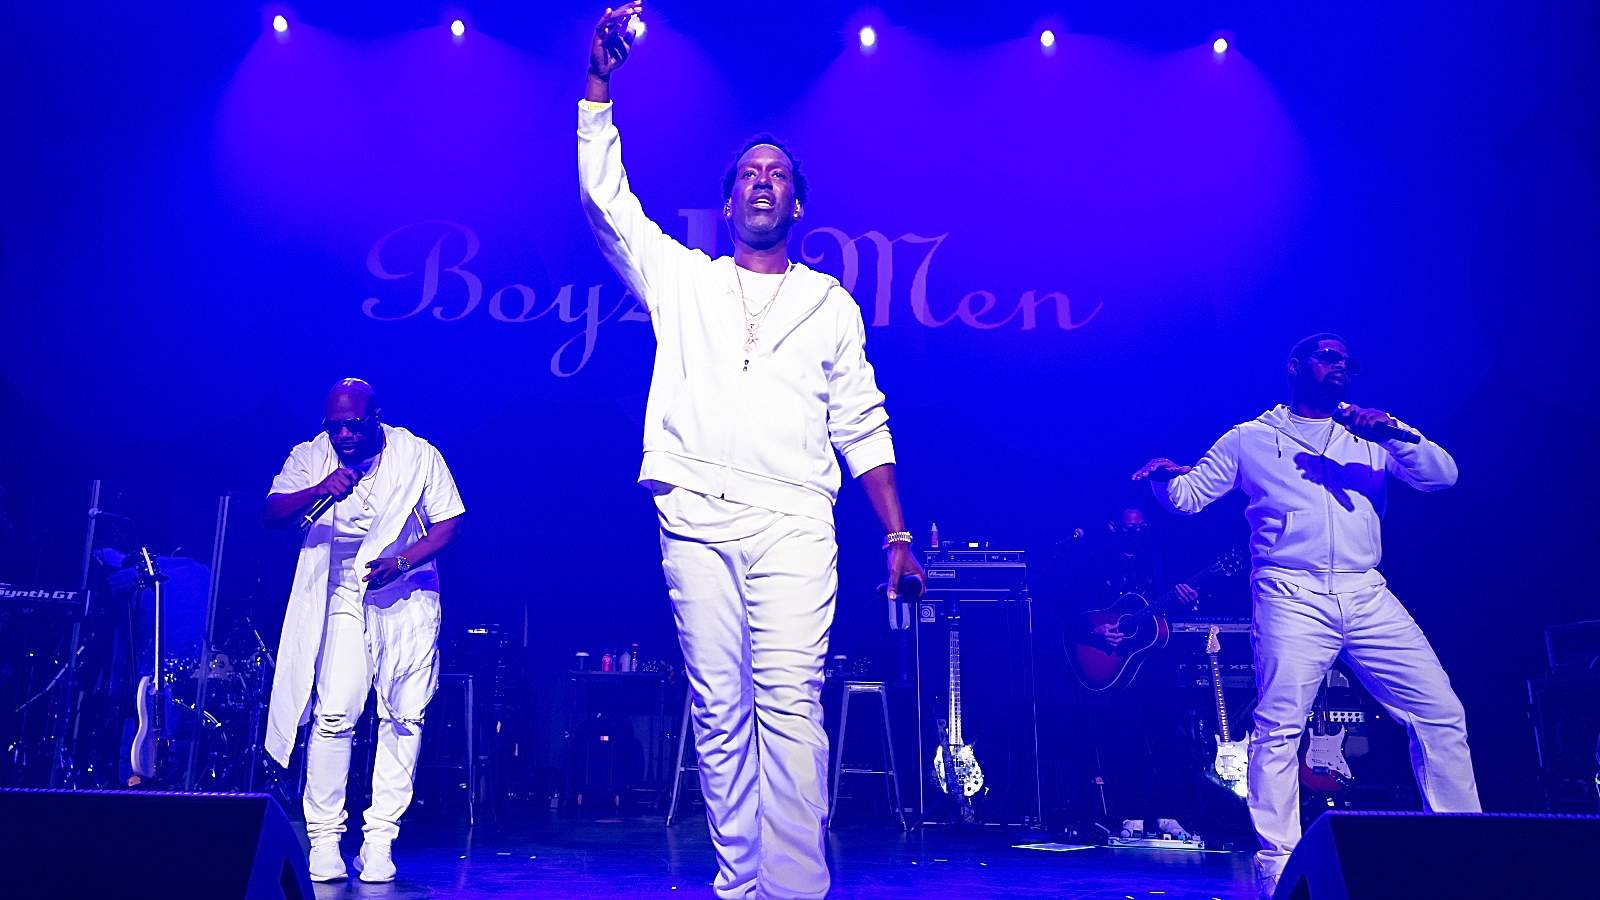 (L-R) Wanya Morris, Shawn Stockman and Nathan Morris of Boyz II Men perform onstage at BleauLive at Fountainbleau Miami Beach on December 18, 2021 in Miami Beach, Florida. 
